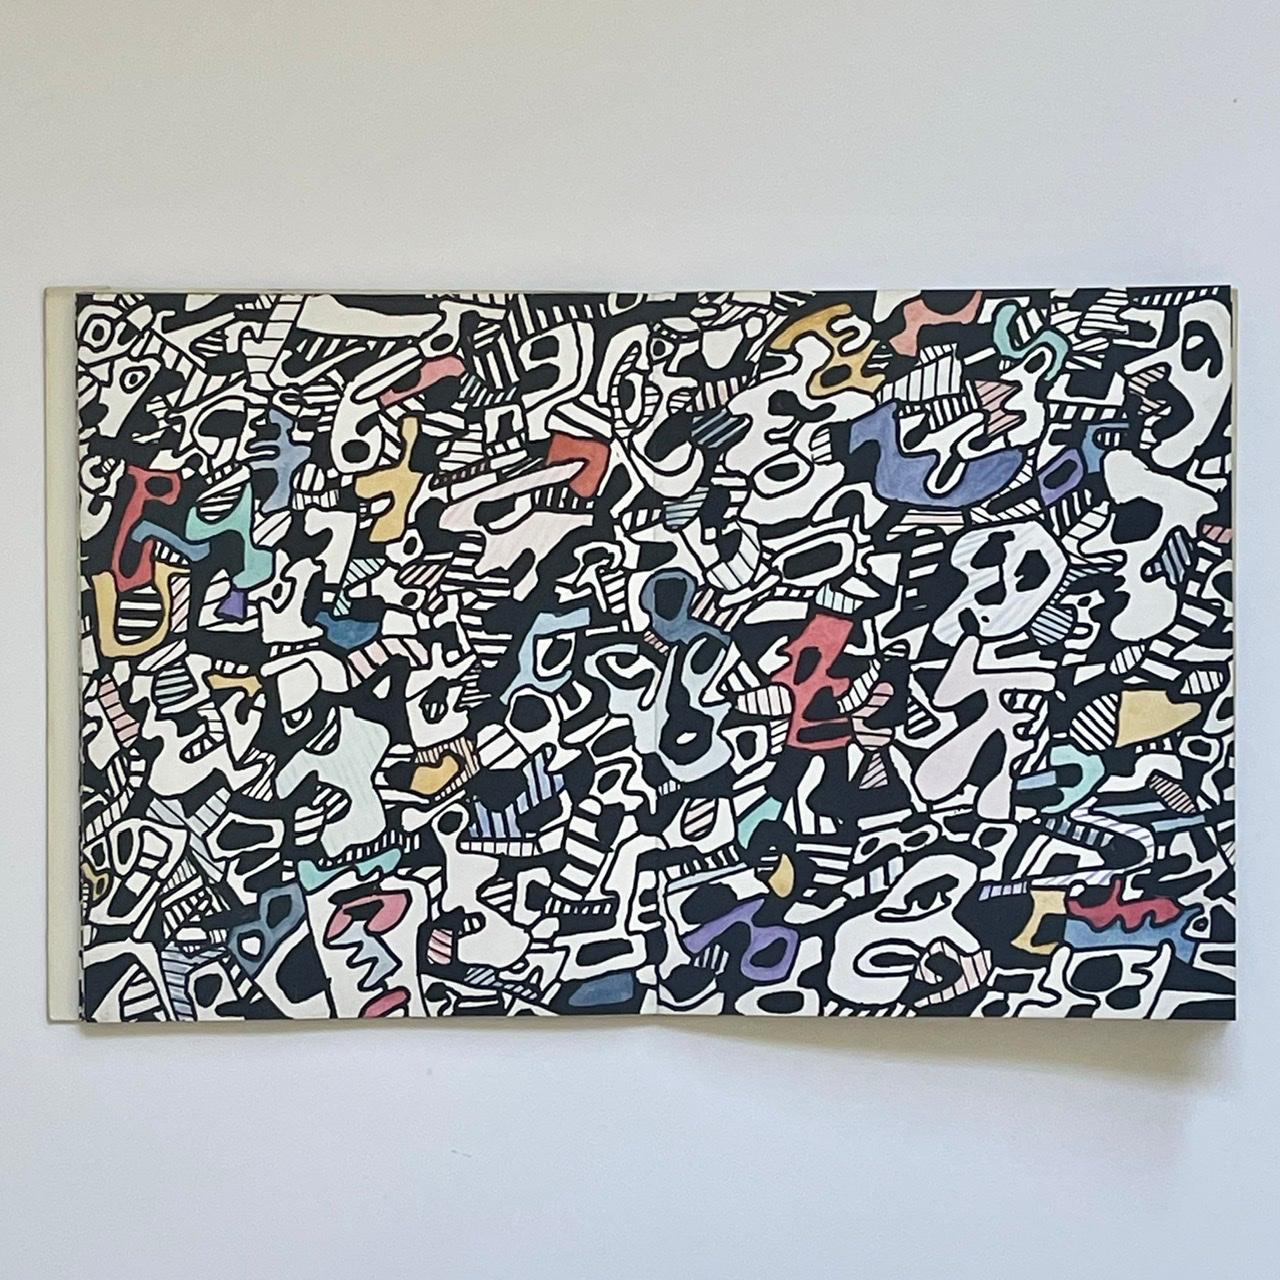 Jean Dubuffet, Parade Funèbre pour Charles Estienne.
Published by Editions Jeanne Bucher, 1967.
Limited to 450 copies of which this is example 324 of 400 numbered copies. 

A fine publication in very good condition including original tissue